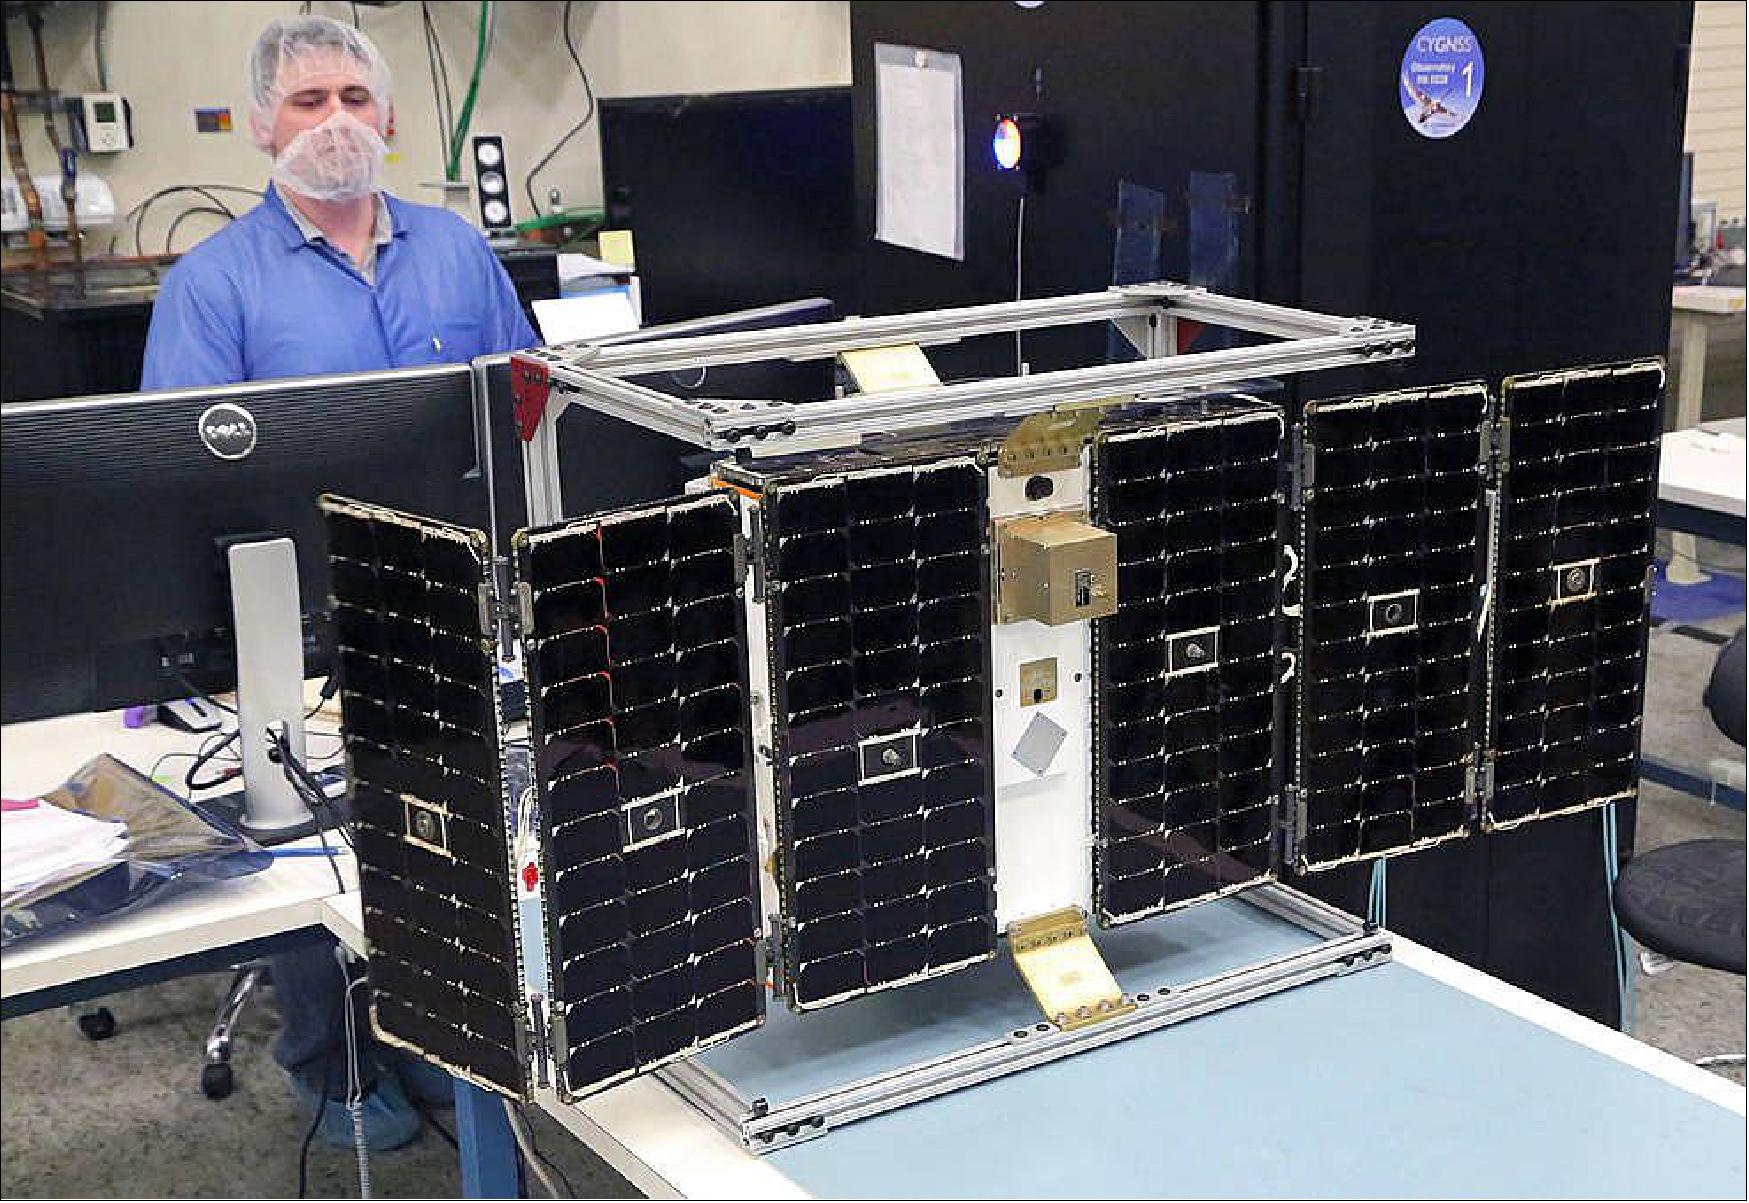 Figure 12: Deployment test of the first completed CYGNSS microsatellite, February 4, 2016, at the Southwest Research Institute (image credit: SwRI, NASA)